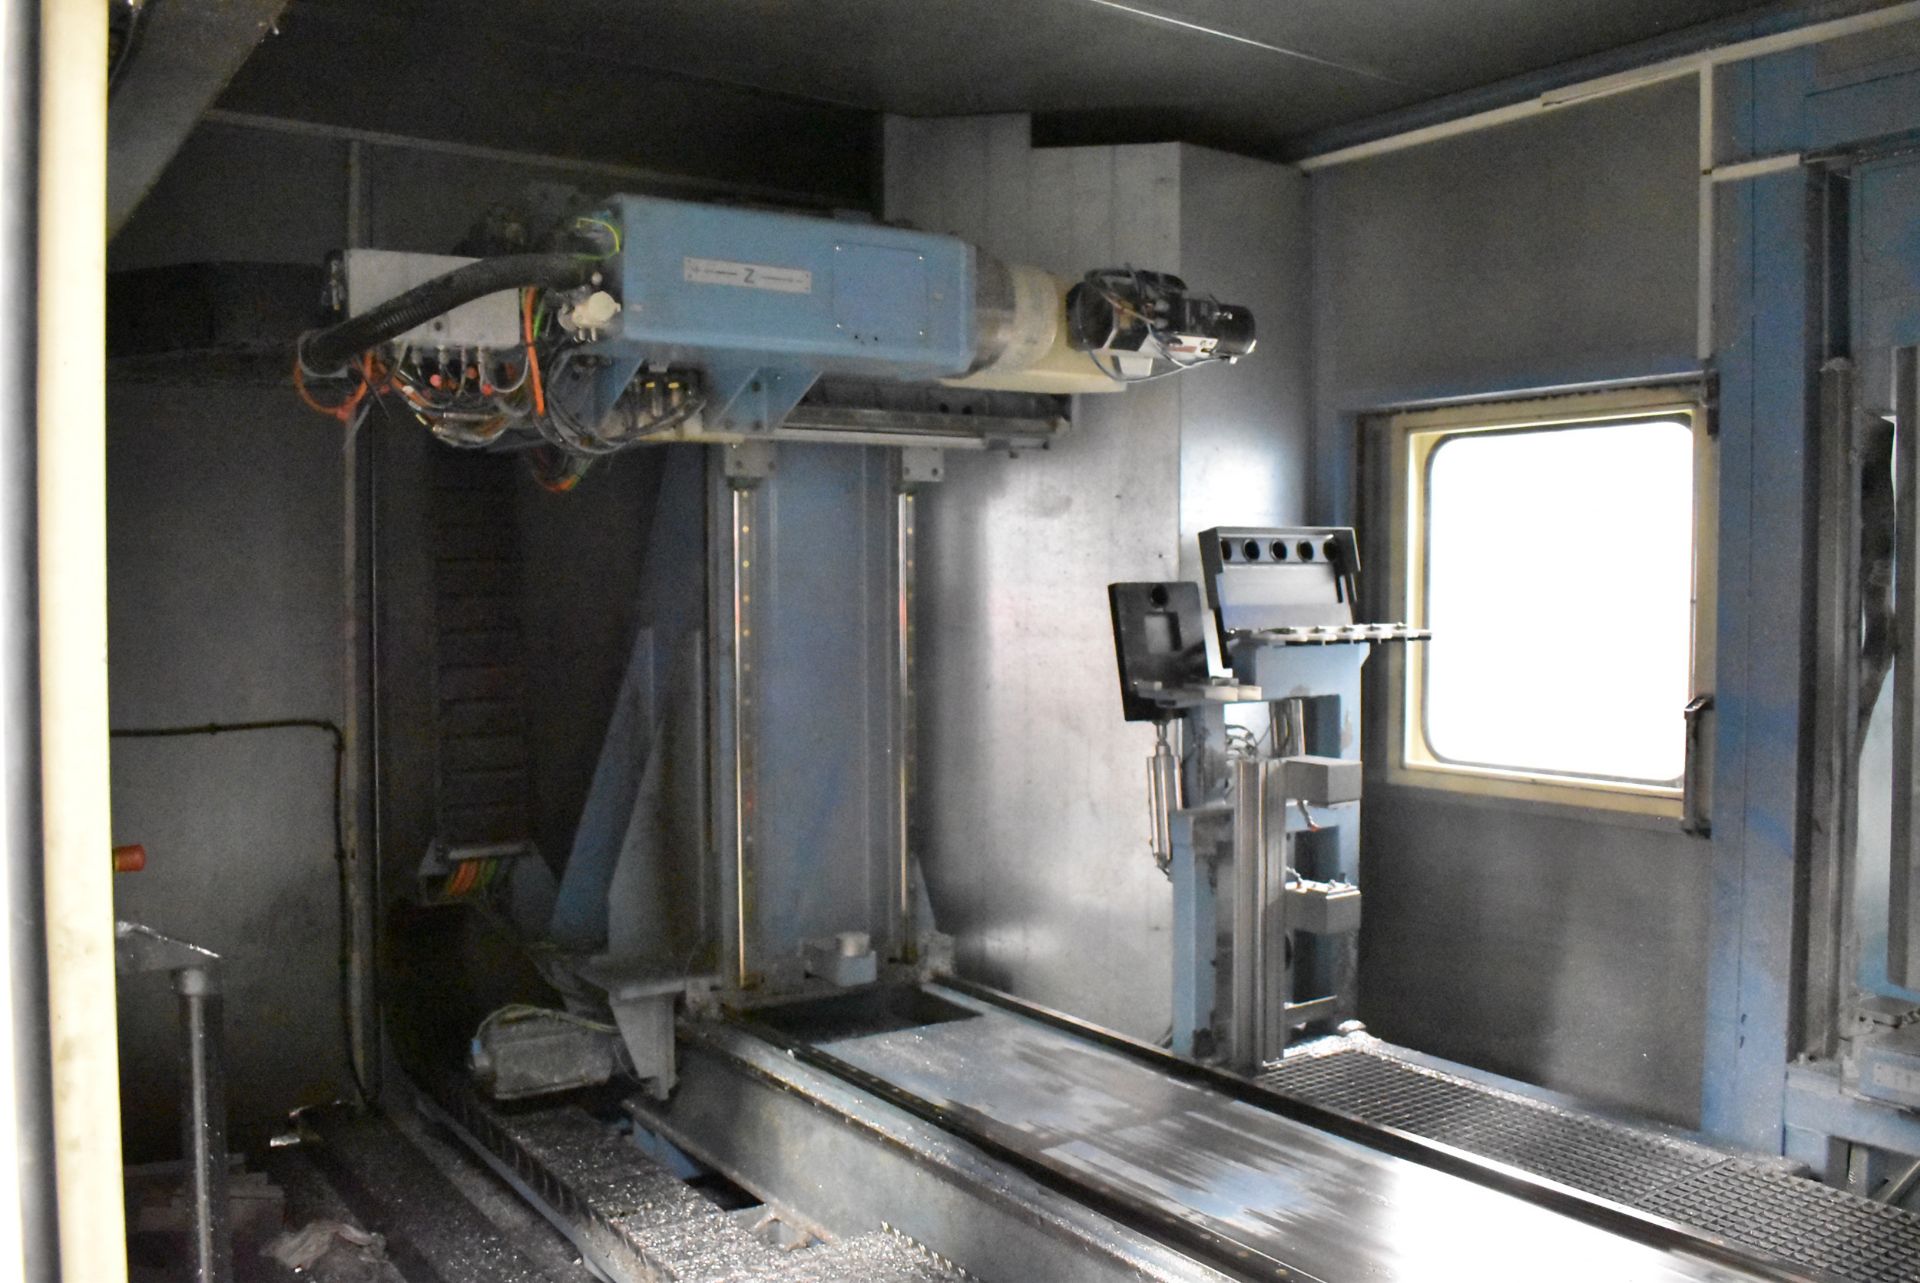 MAKA (2012) DC7D 7 AXIS CNC MACHINING CENTER WITH SIEMENS SINEUMERIK TOUCH SCREEN CNC CONTROL, - Image 8 of 12